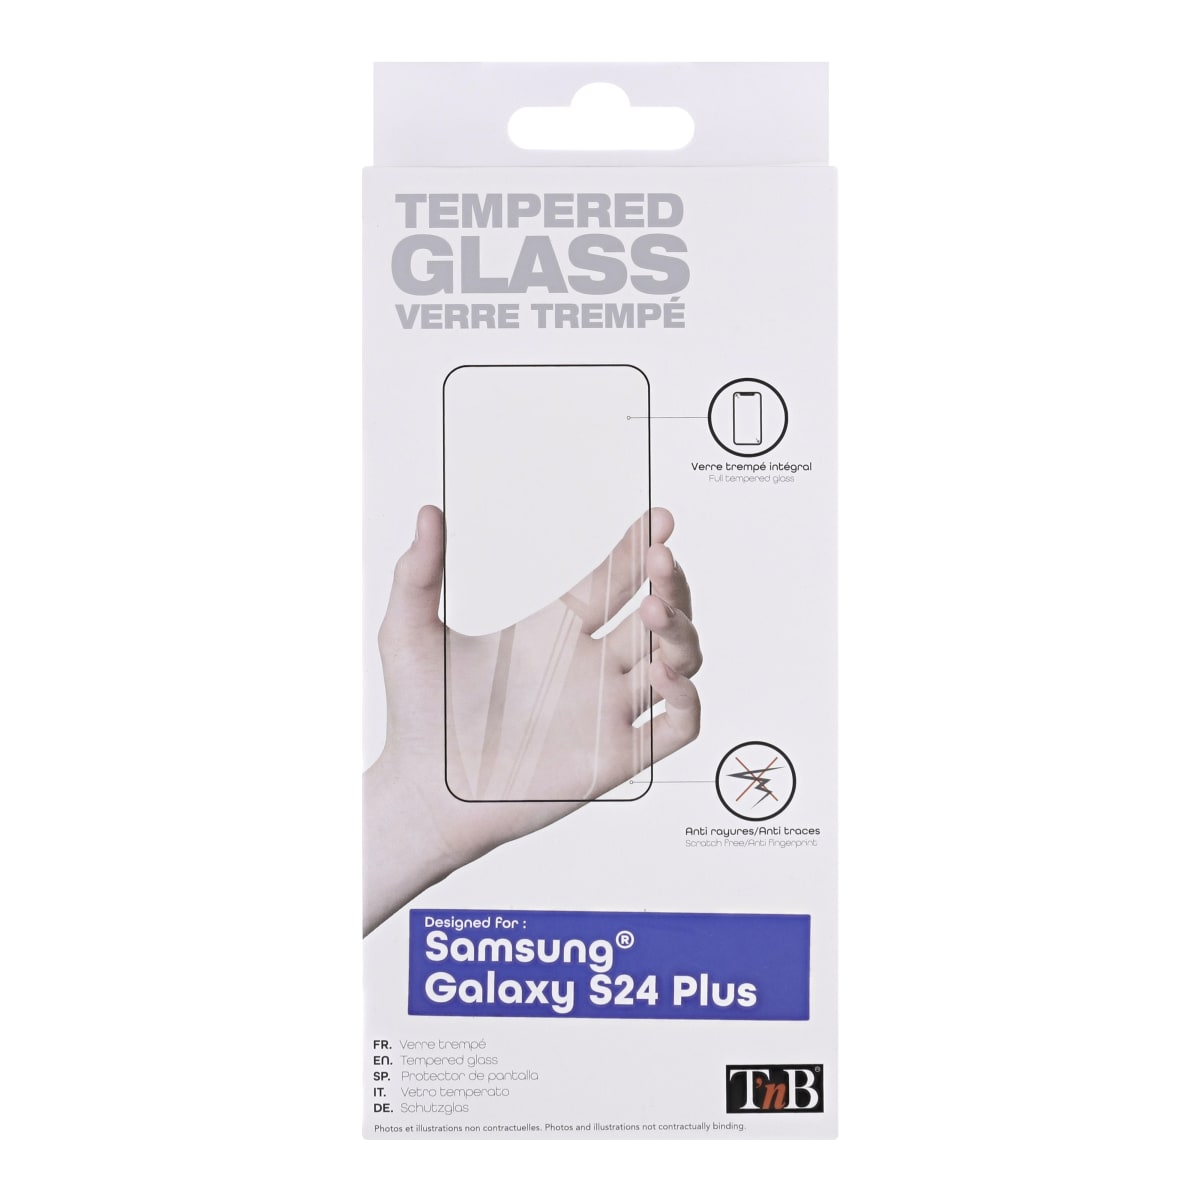 Tempered glass protection for Samsung Galaxy S24 Plus